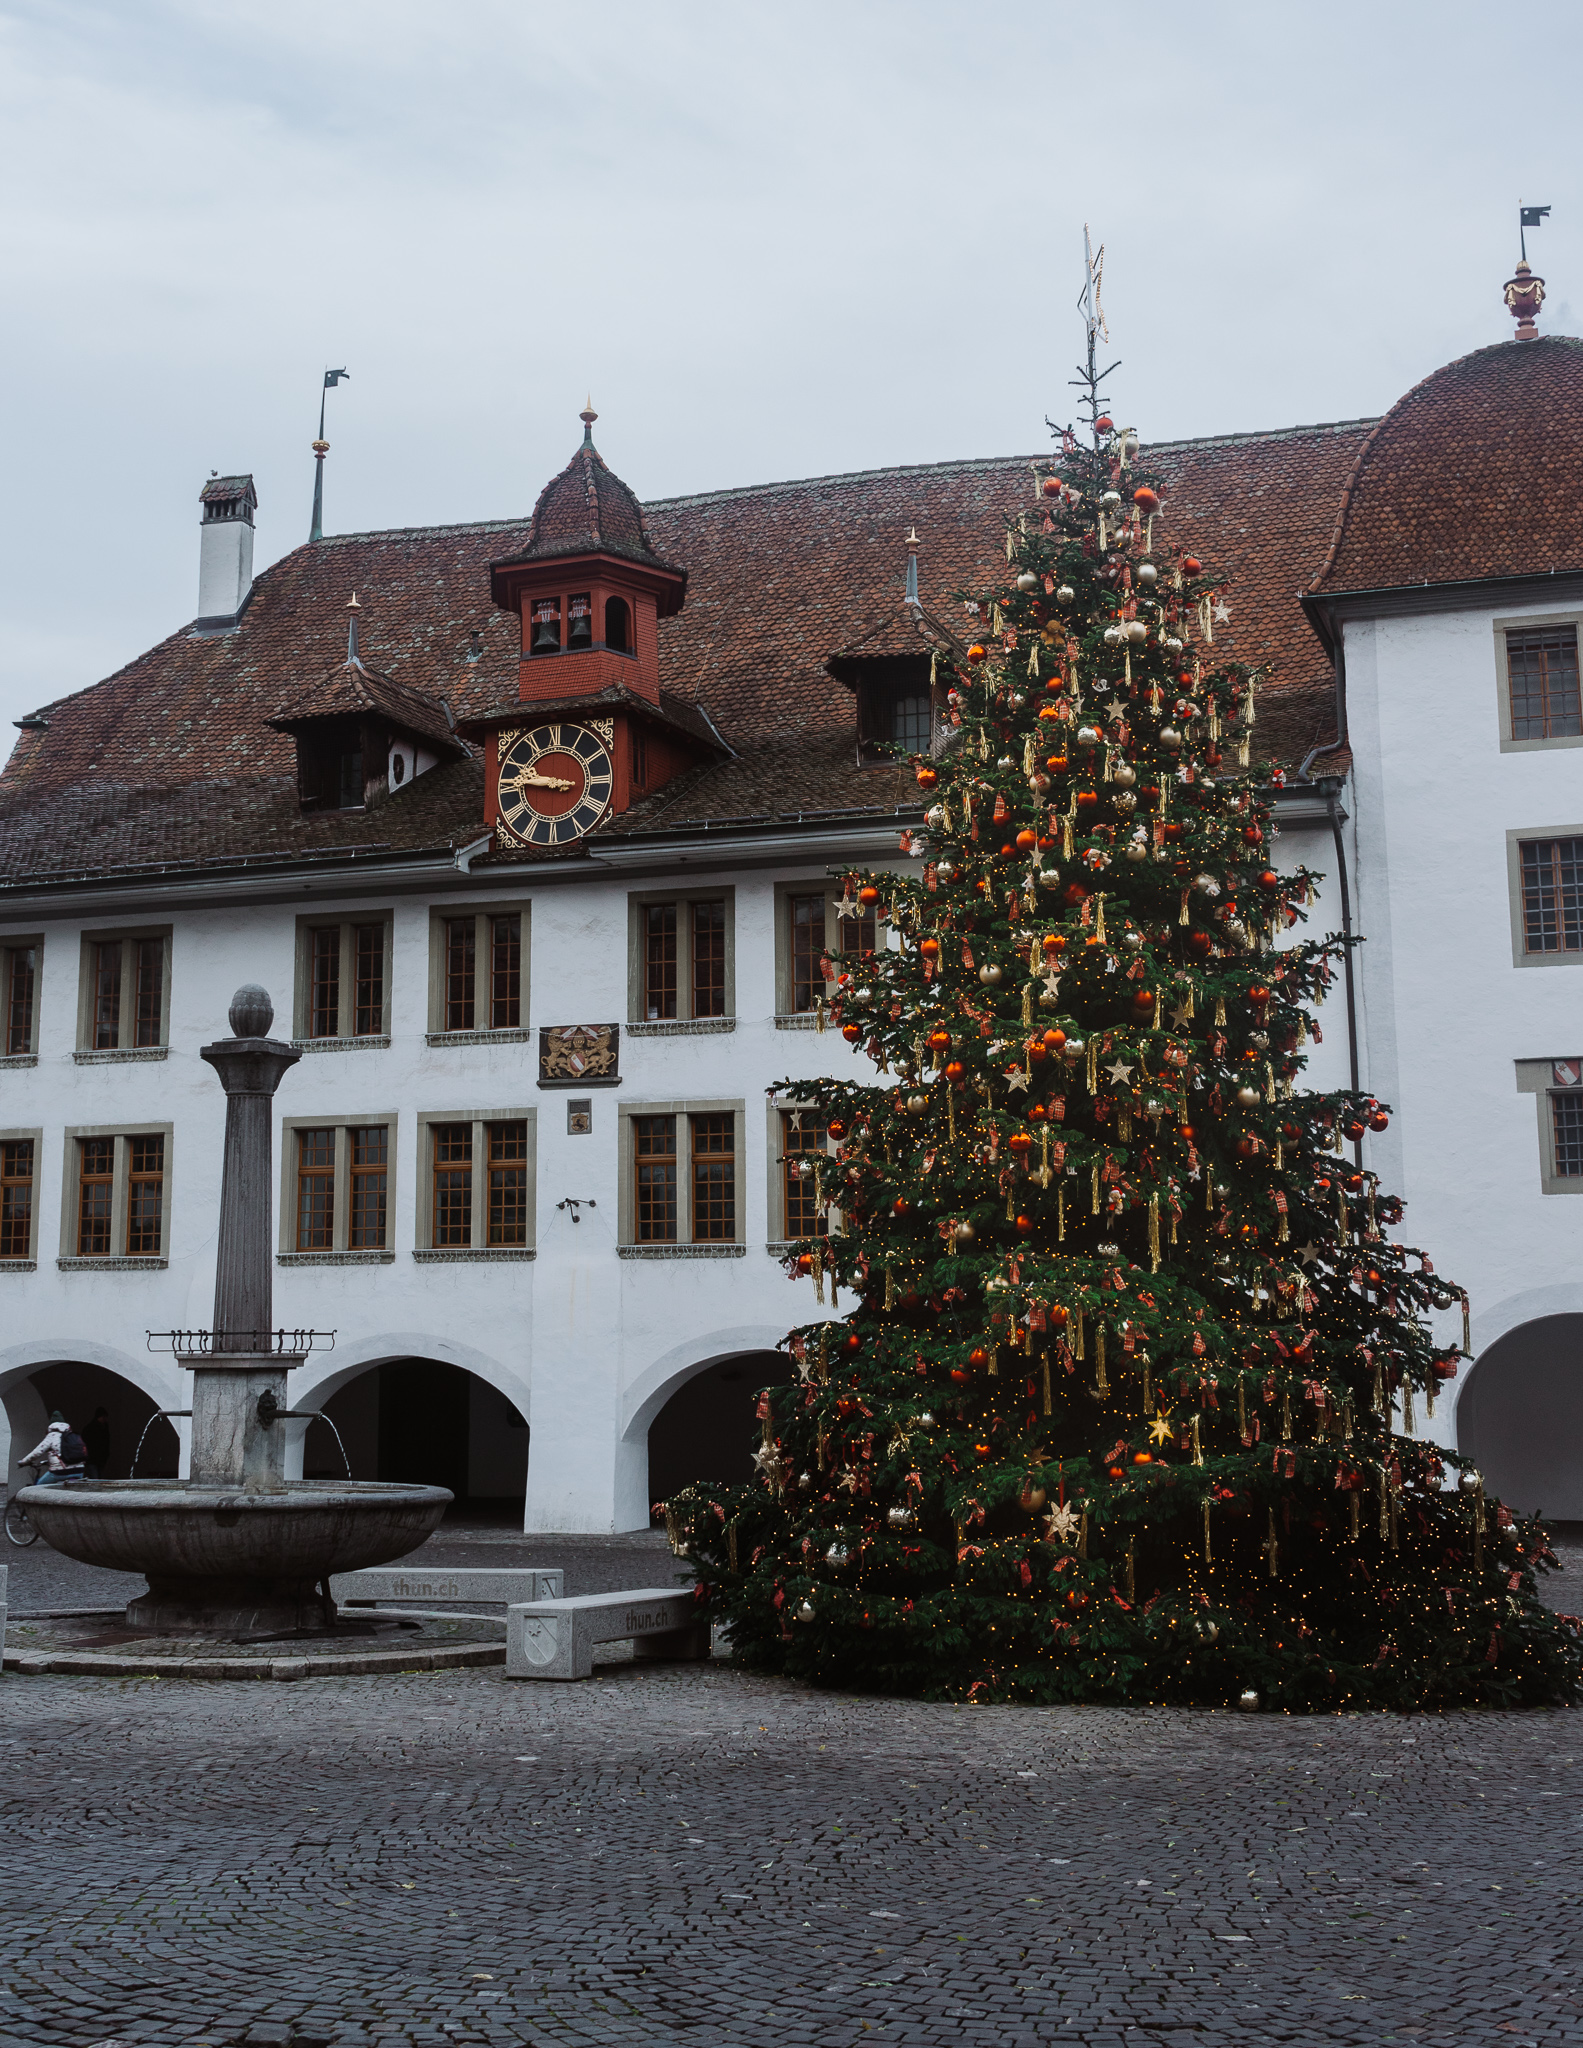 Thun old town with a white town hall in the background and a Christmas tree in Switzerland in winter